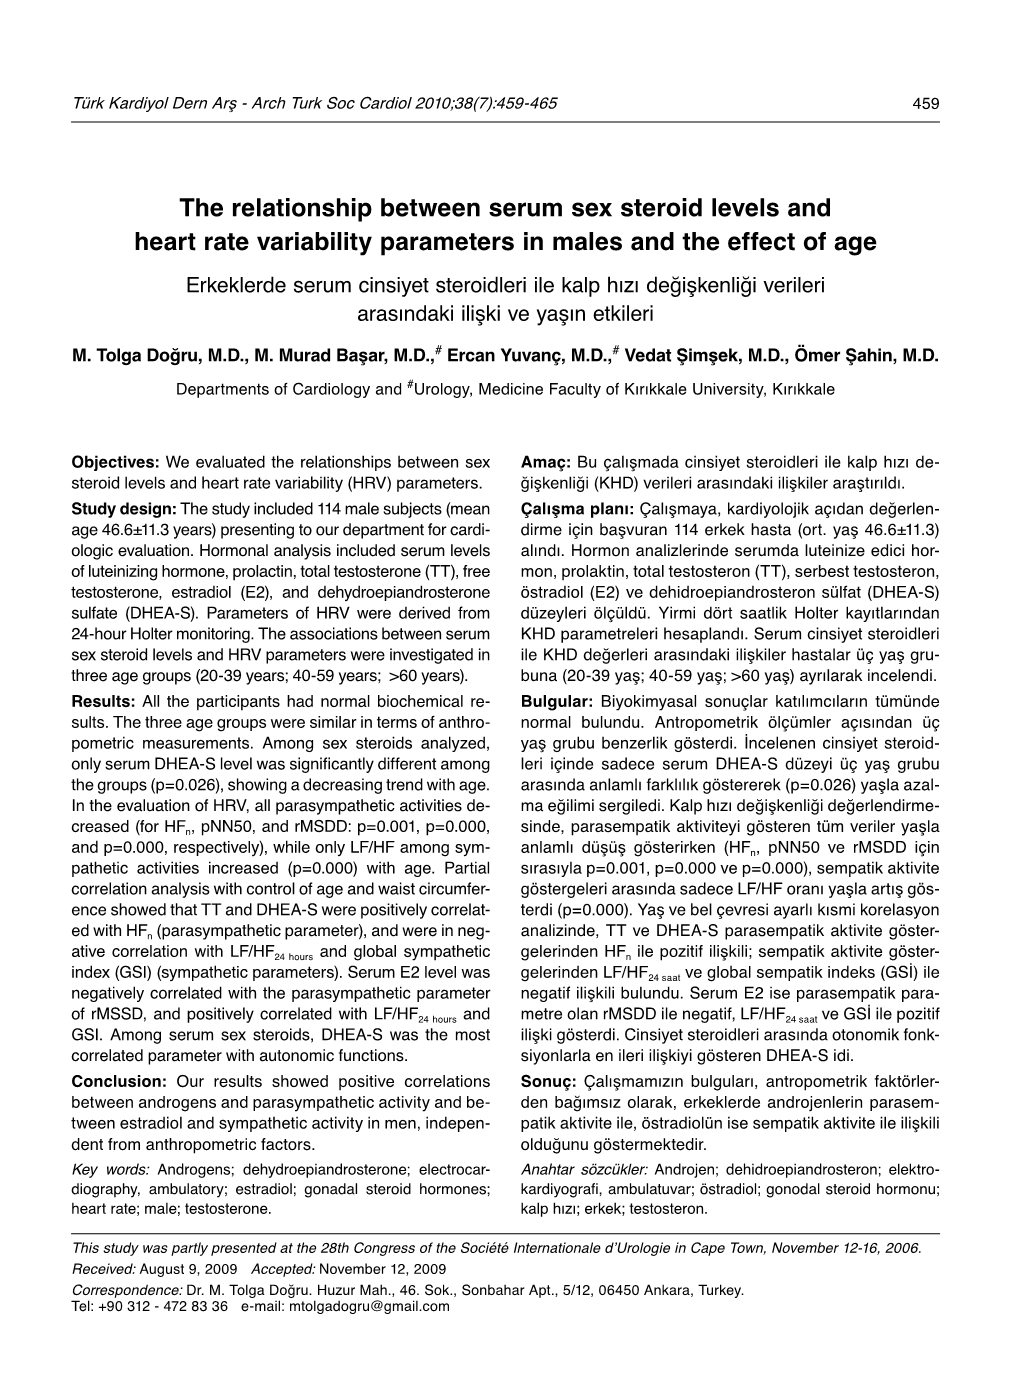 The Relationship Between Serum Sex Steroid Levels and Heart Rate Variability Parameters in Males and the Effect Of